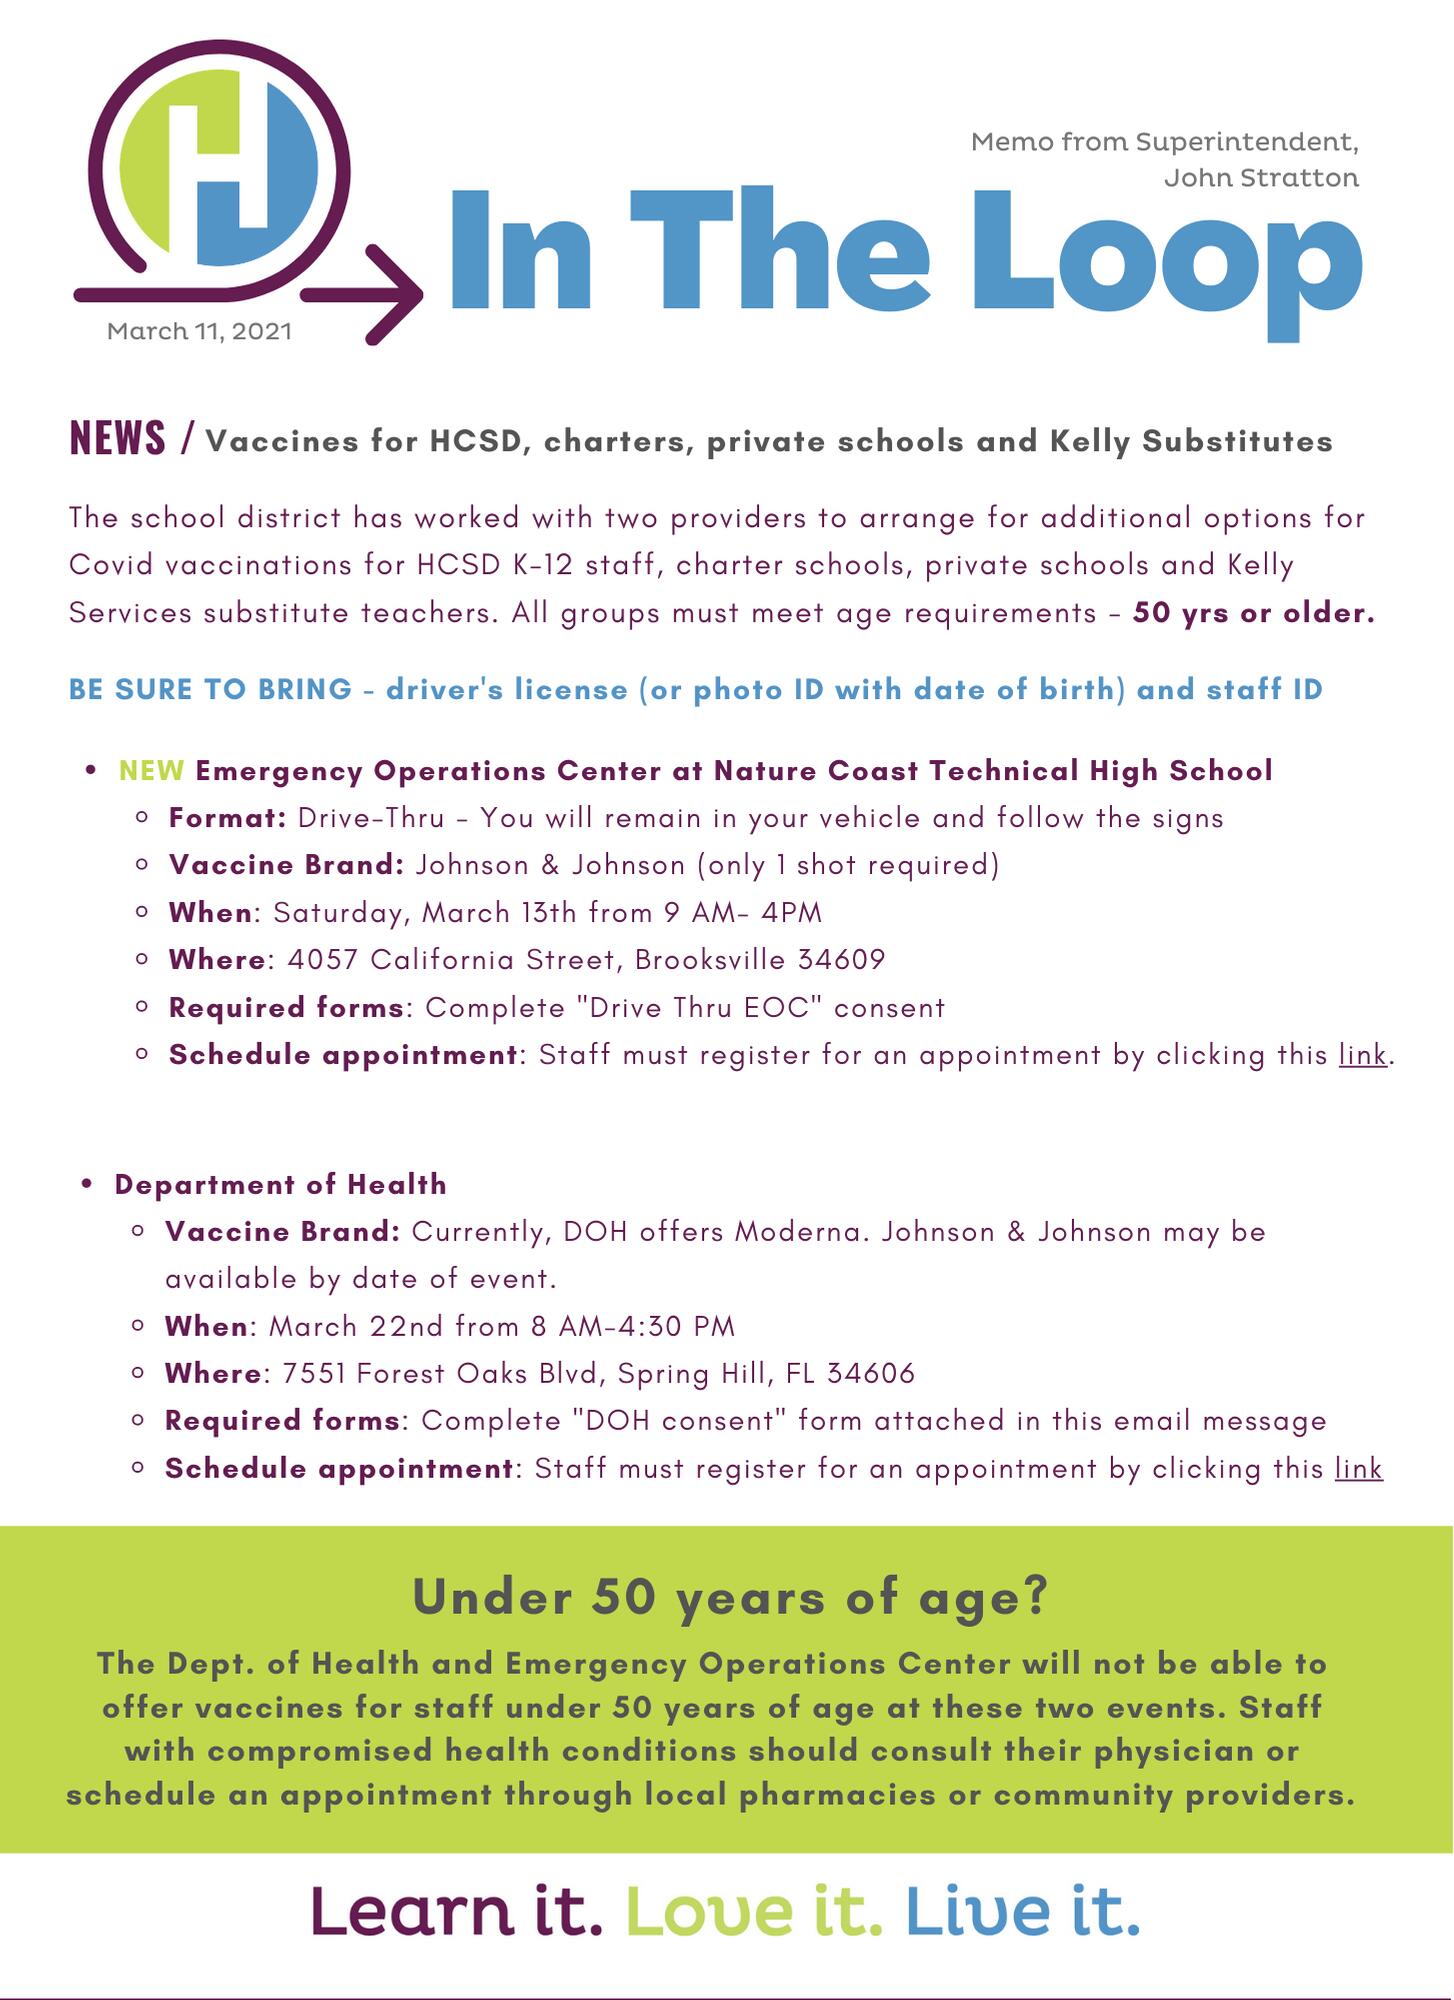 In the Loop - March 11 newsletter